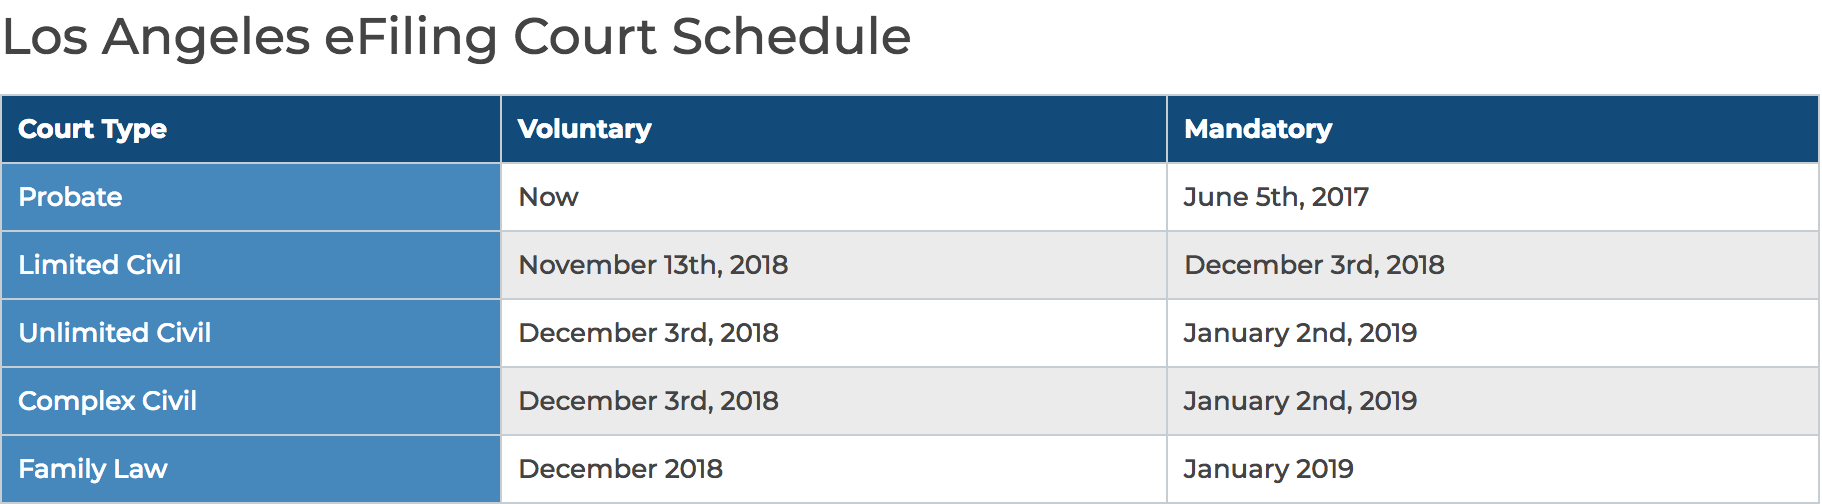 Los Angeles eFiling Court Schedule